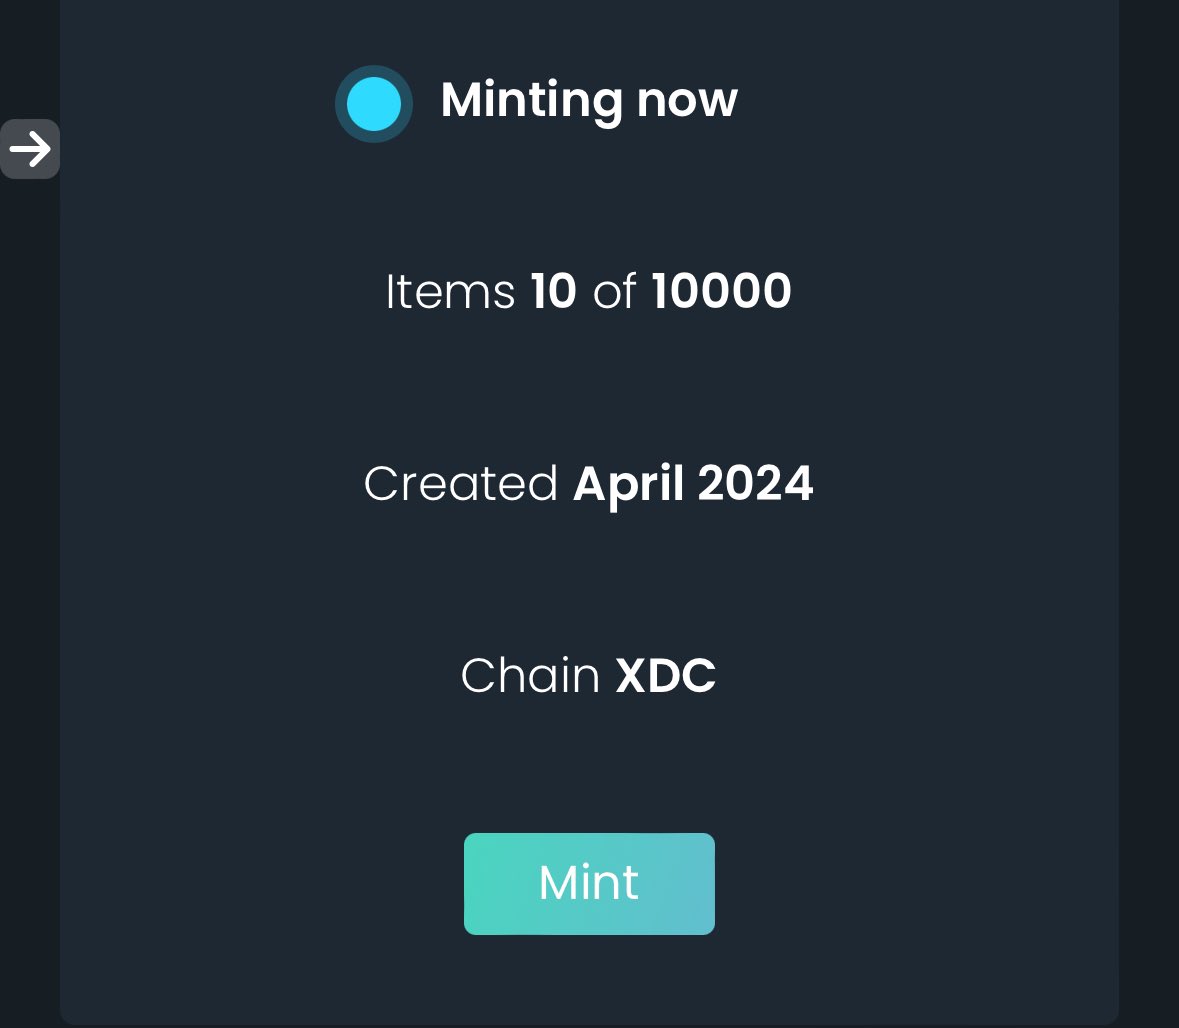 🌱 Exciting news! 🔥 10/10,000 Recycle2Earn DAO tokens minted! 🌟 Join today and be part of the sustainability revolution! 🌍💚 #Recycle2Earn #DAO #Sustainability #JoinNow #XDC #GZX